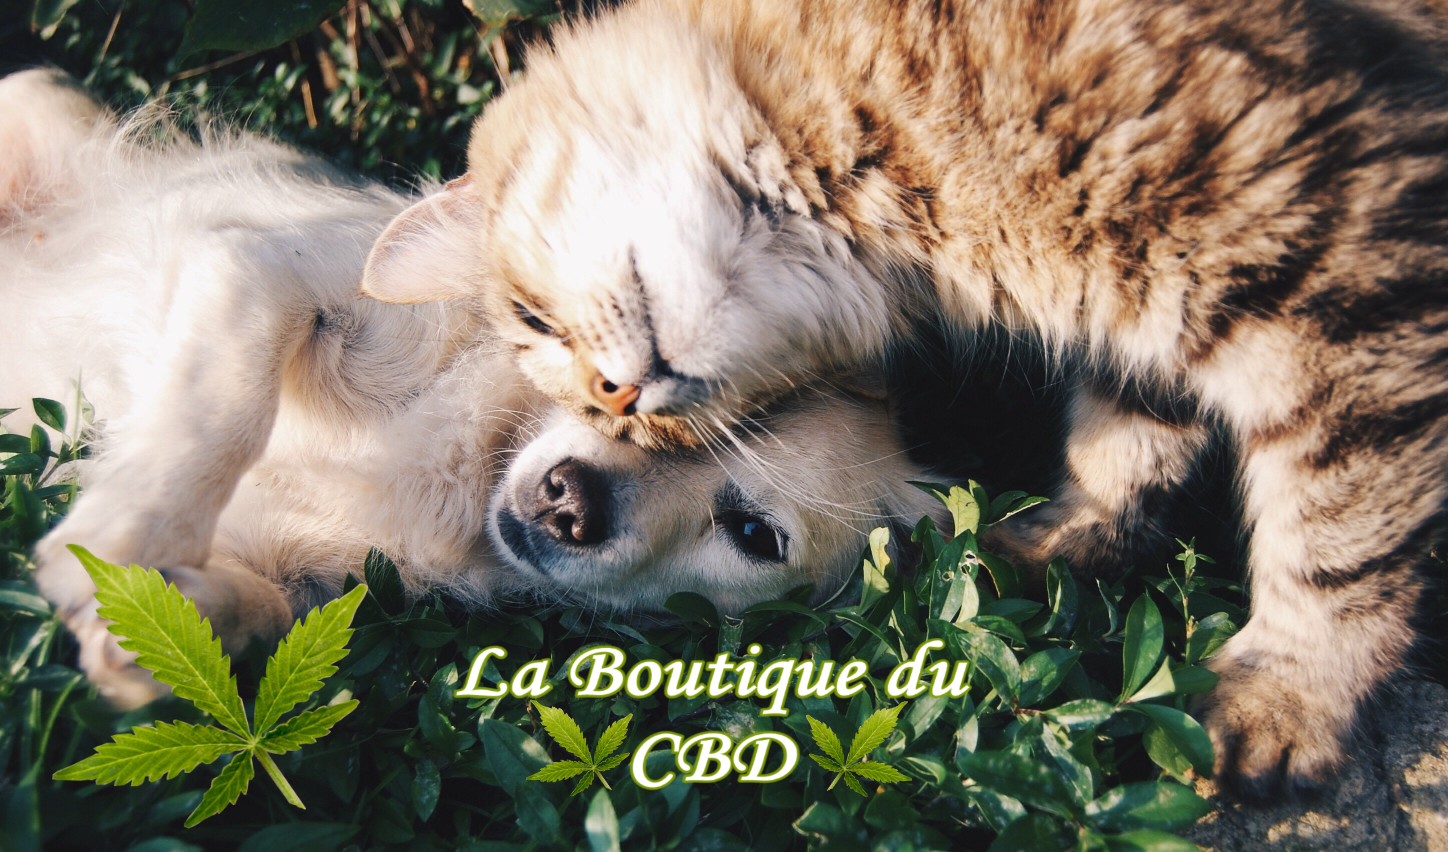 HUILE CBD POUR ANIMAUX BARCY 77